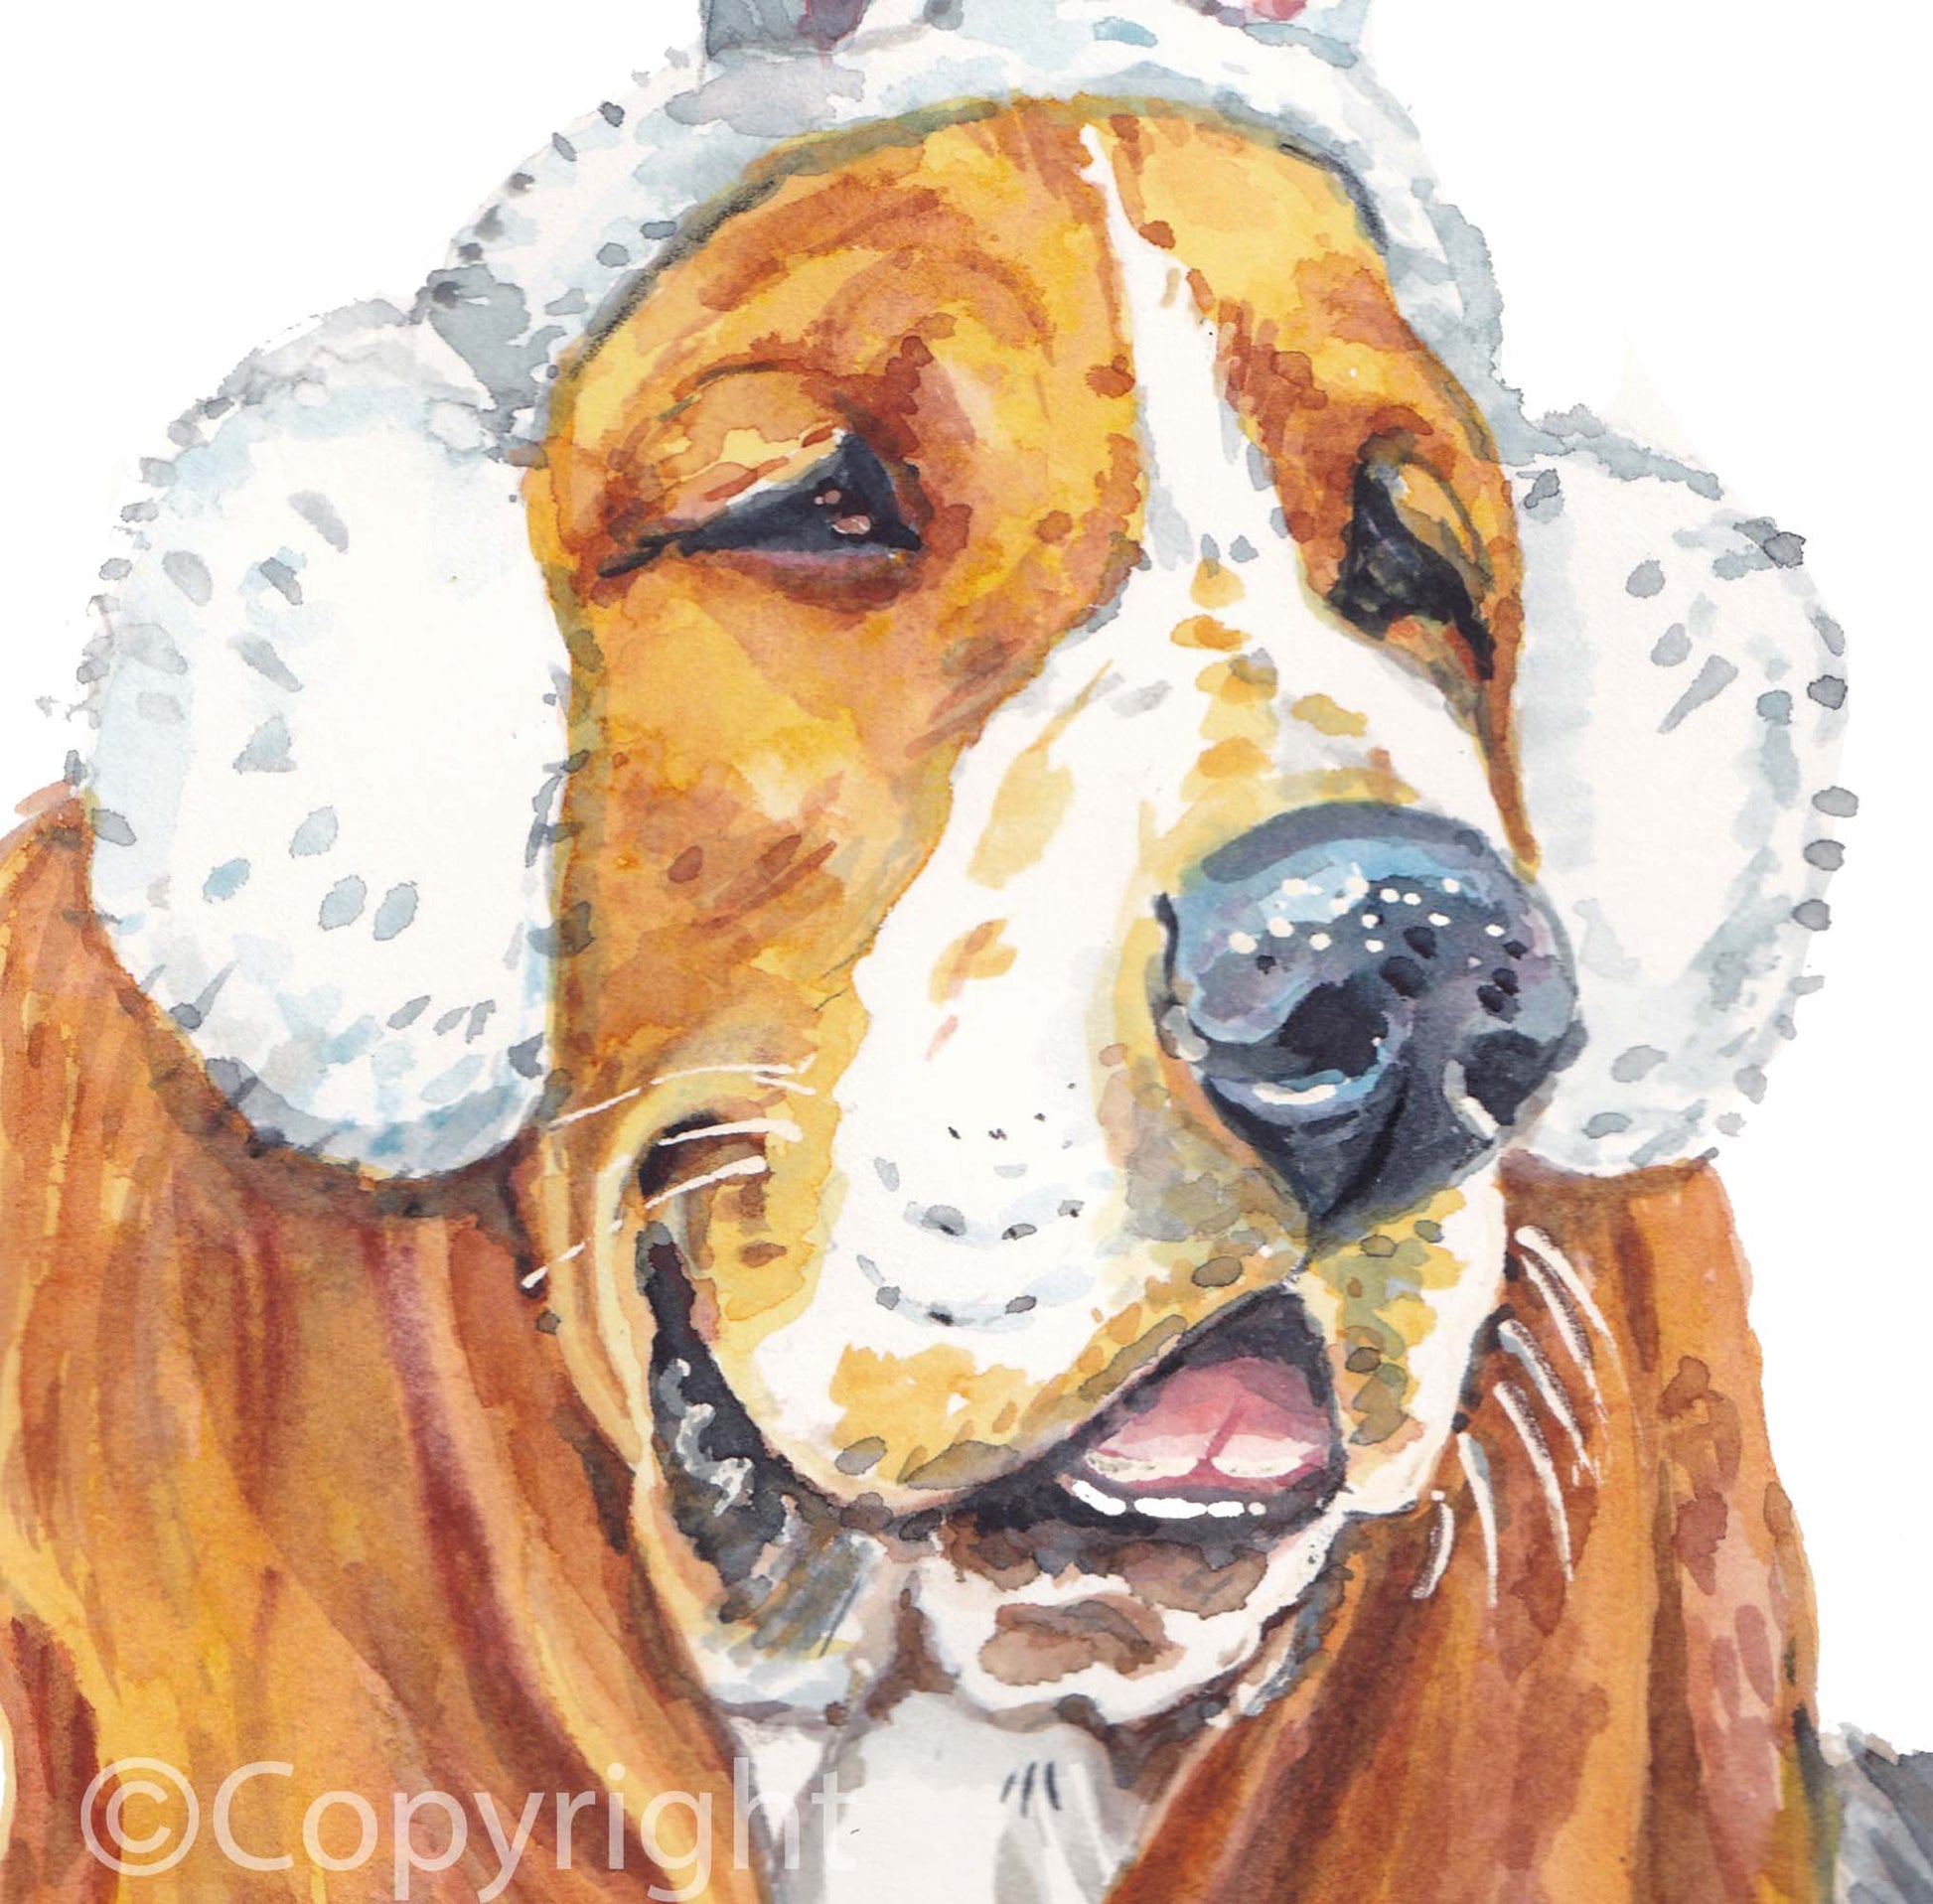 Watercolour painting of a Bassett hound dog wearing a set of ear muffs topped with bunny rabbit ears